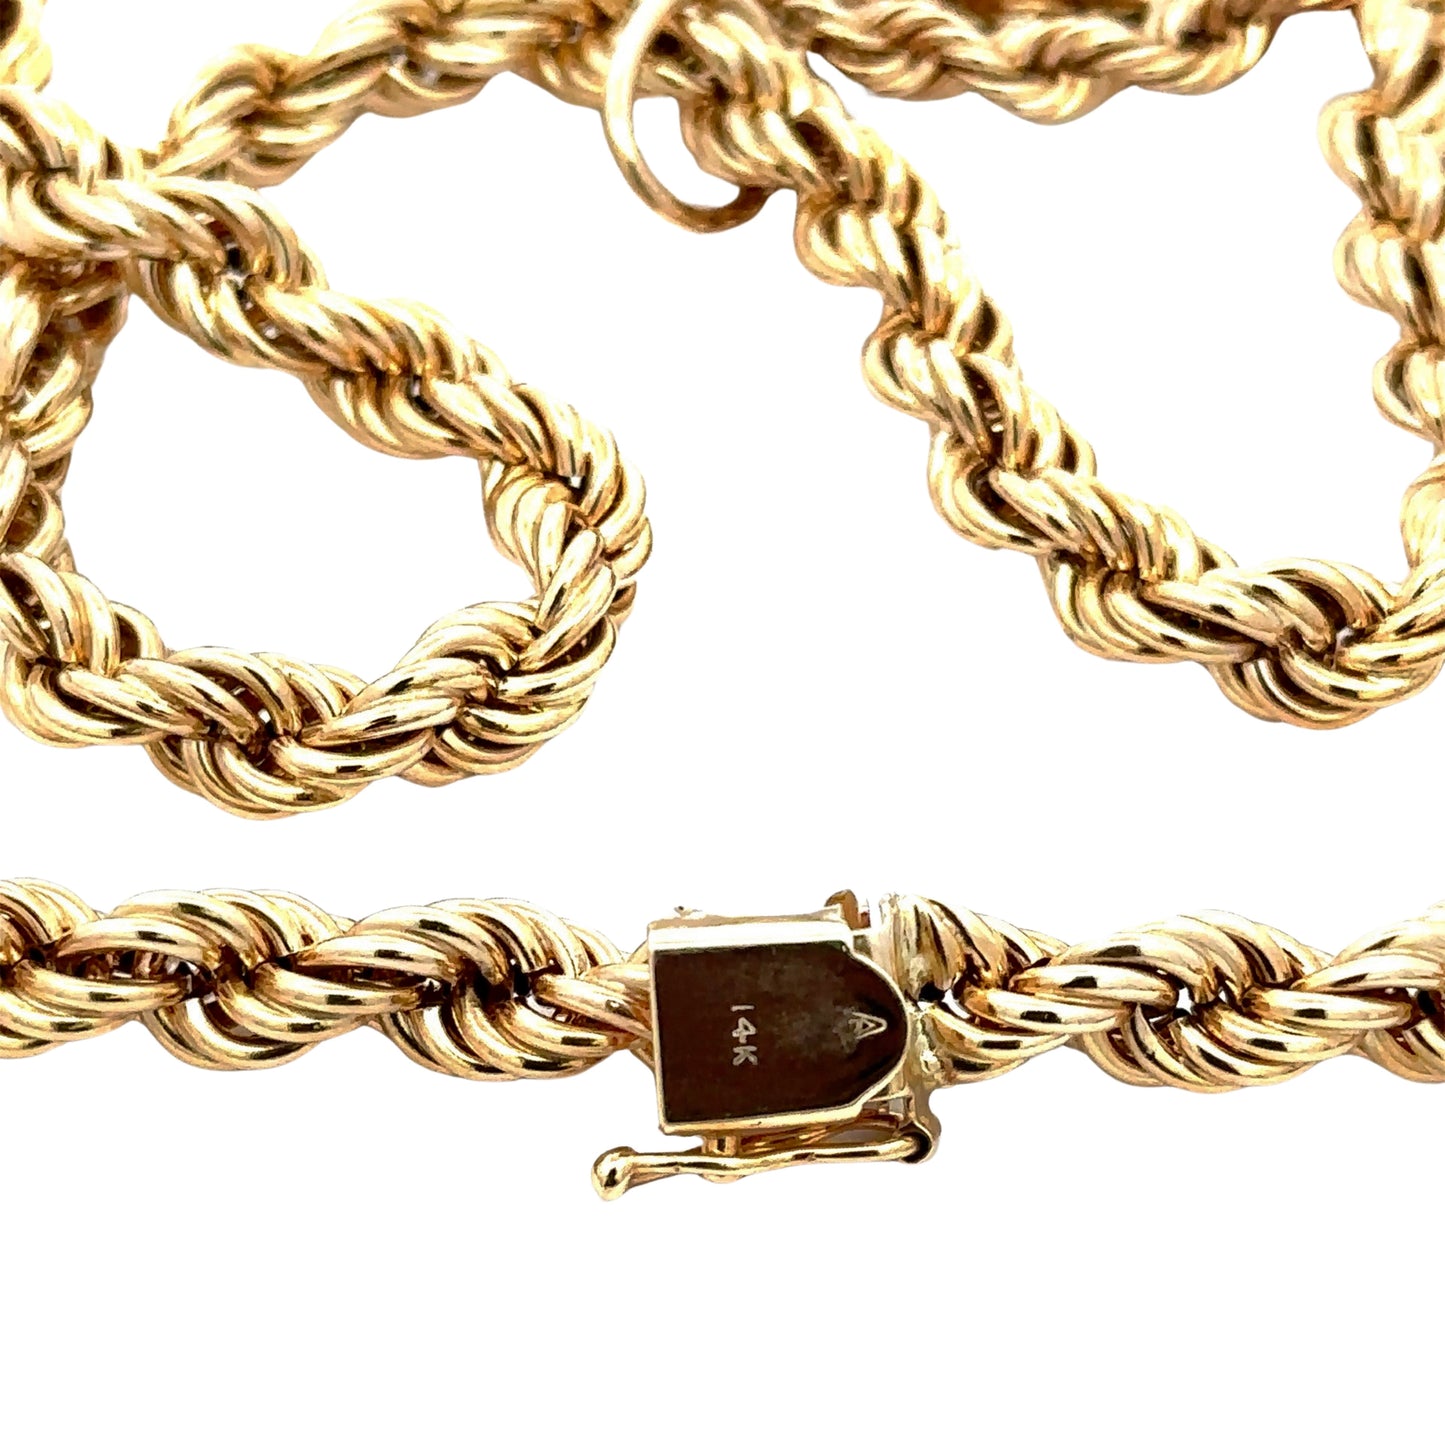 14K stamp on yellow gold clasp.